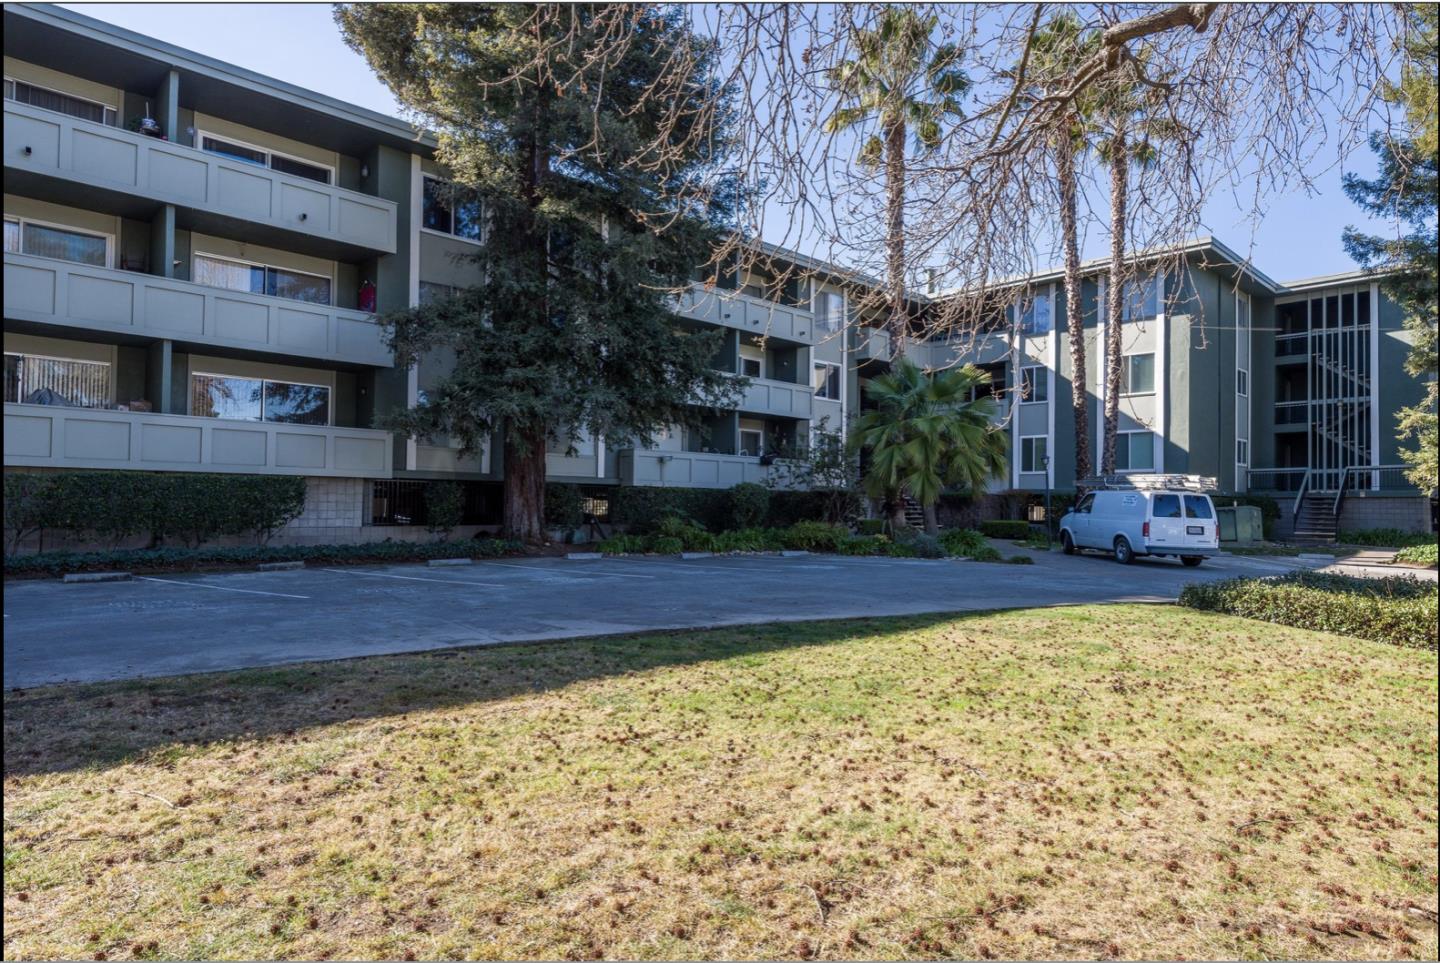 Photo of 1458 Hudson St #208 in Redwood City, CA